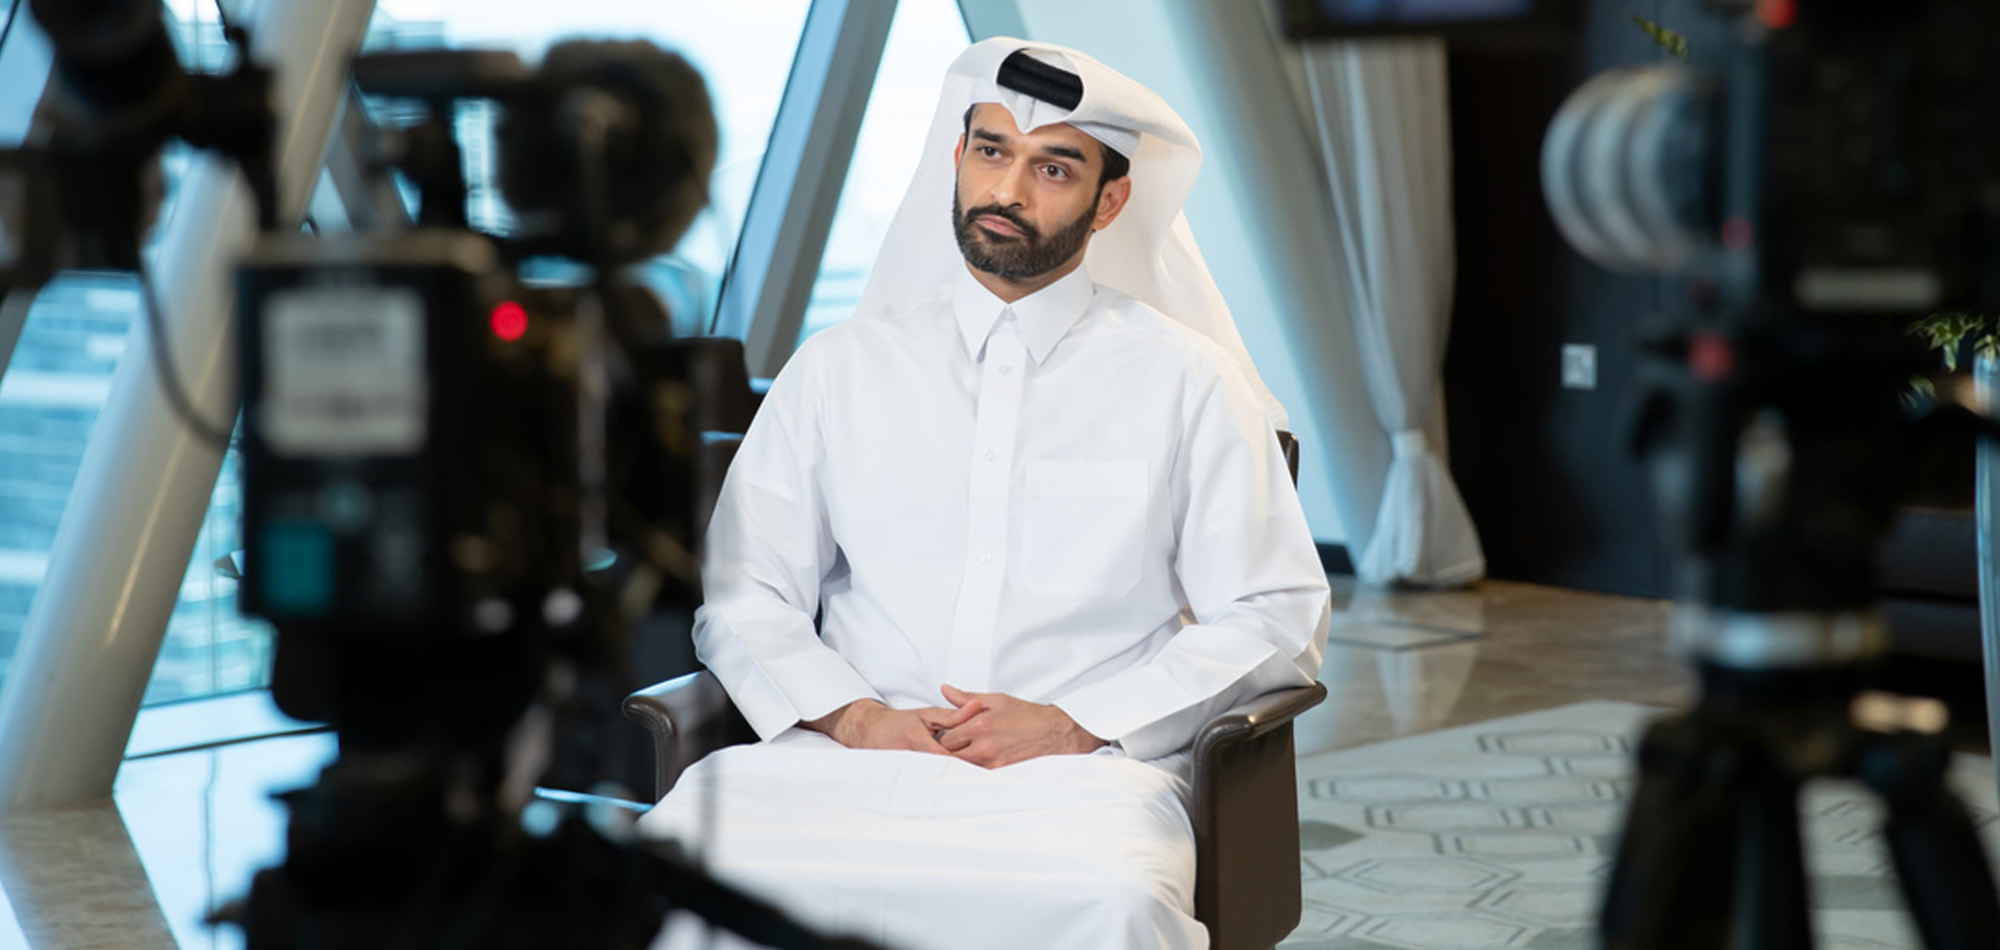 Hassan Al Thawadi addresses UN meeting on the security of major sporting events